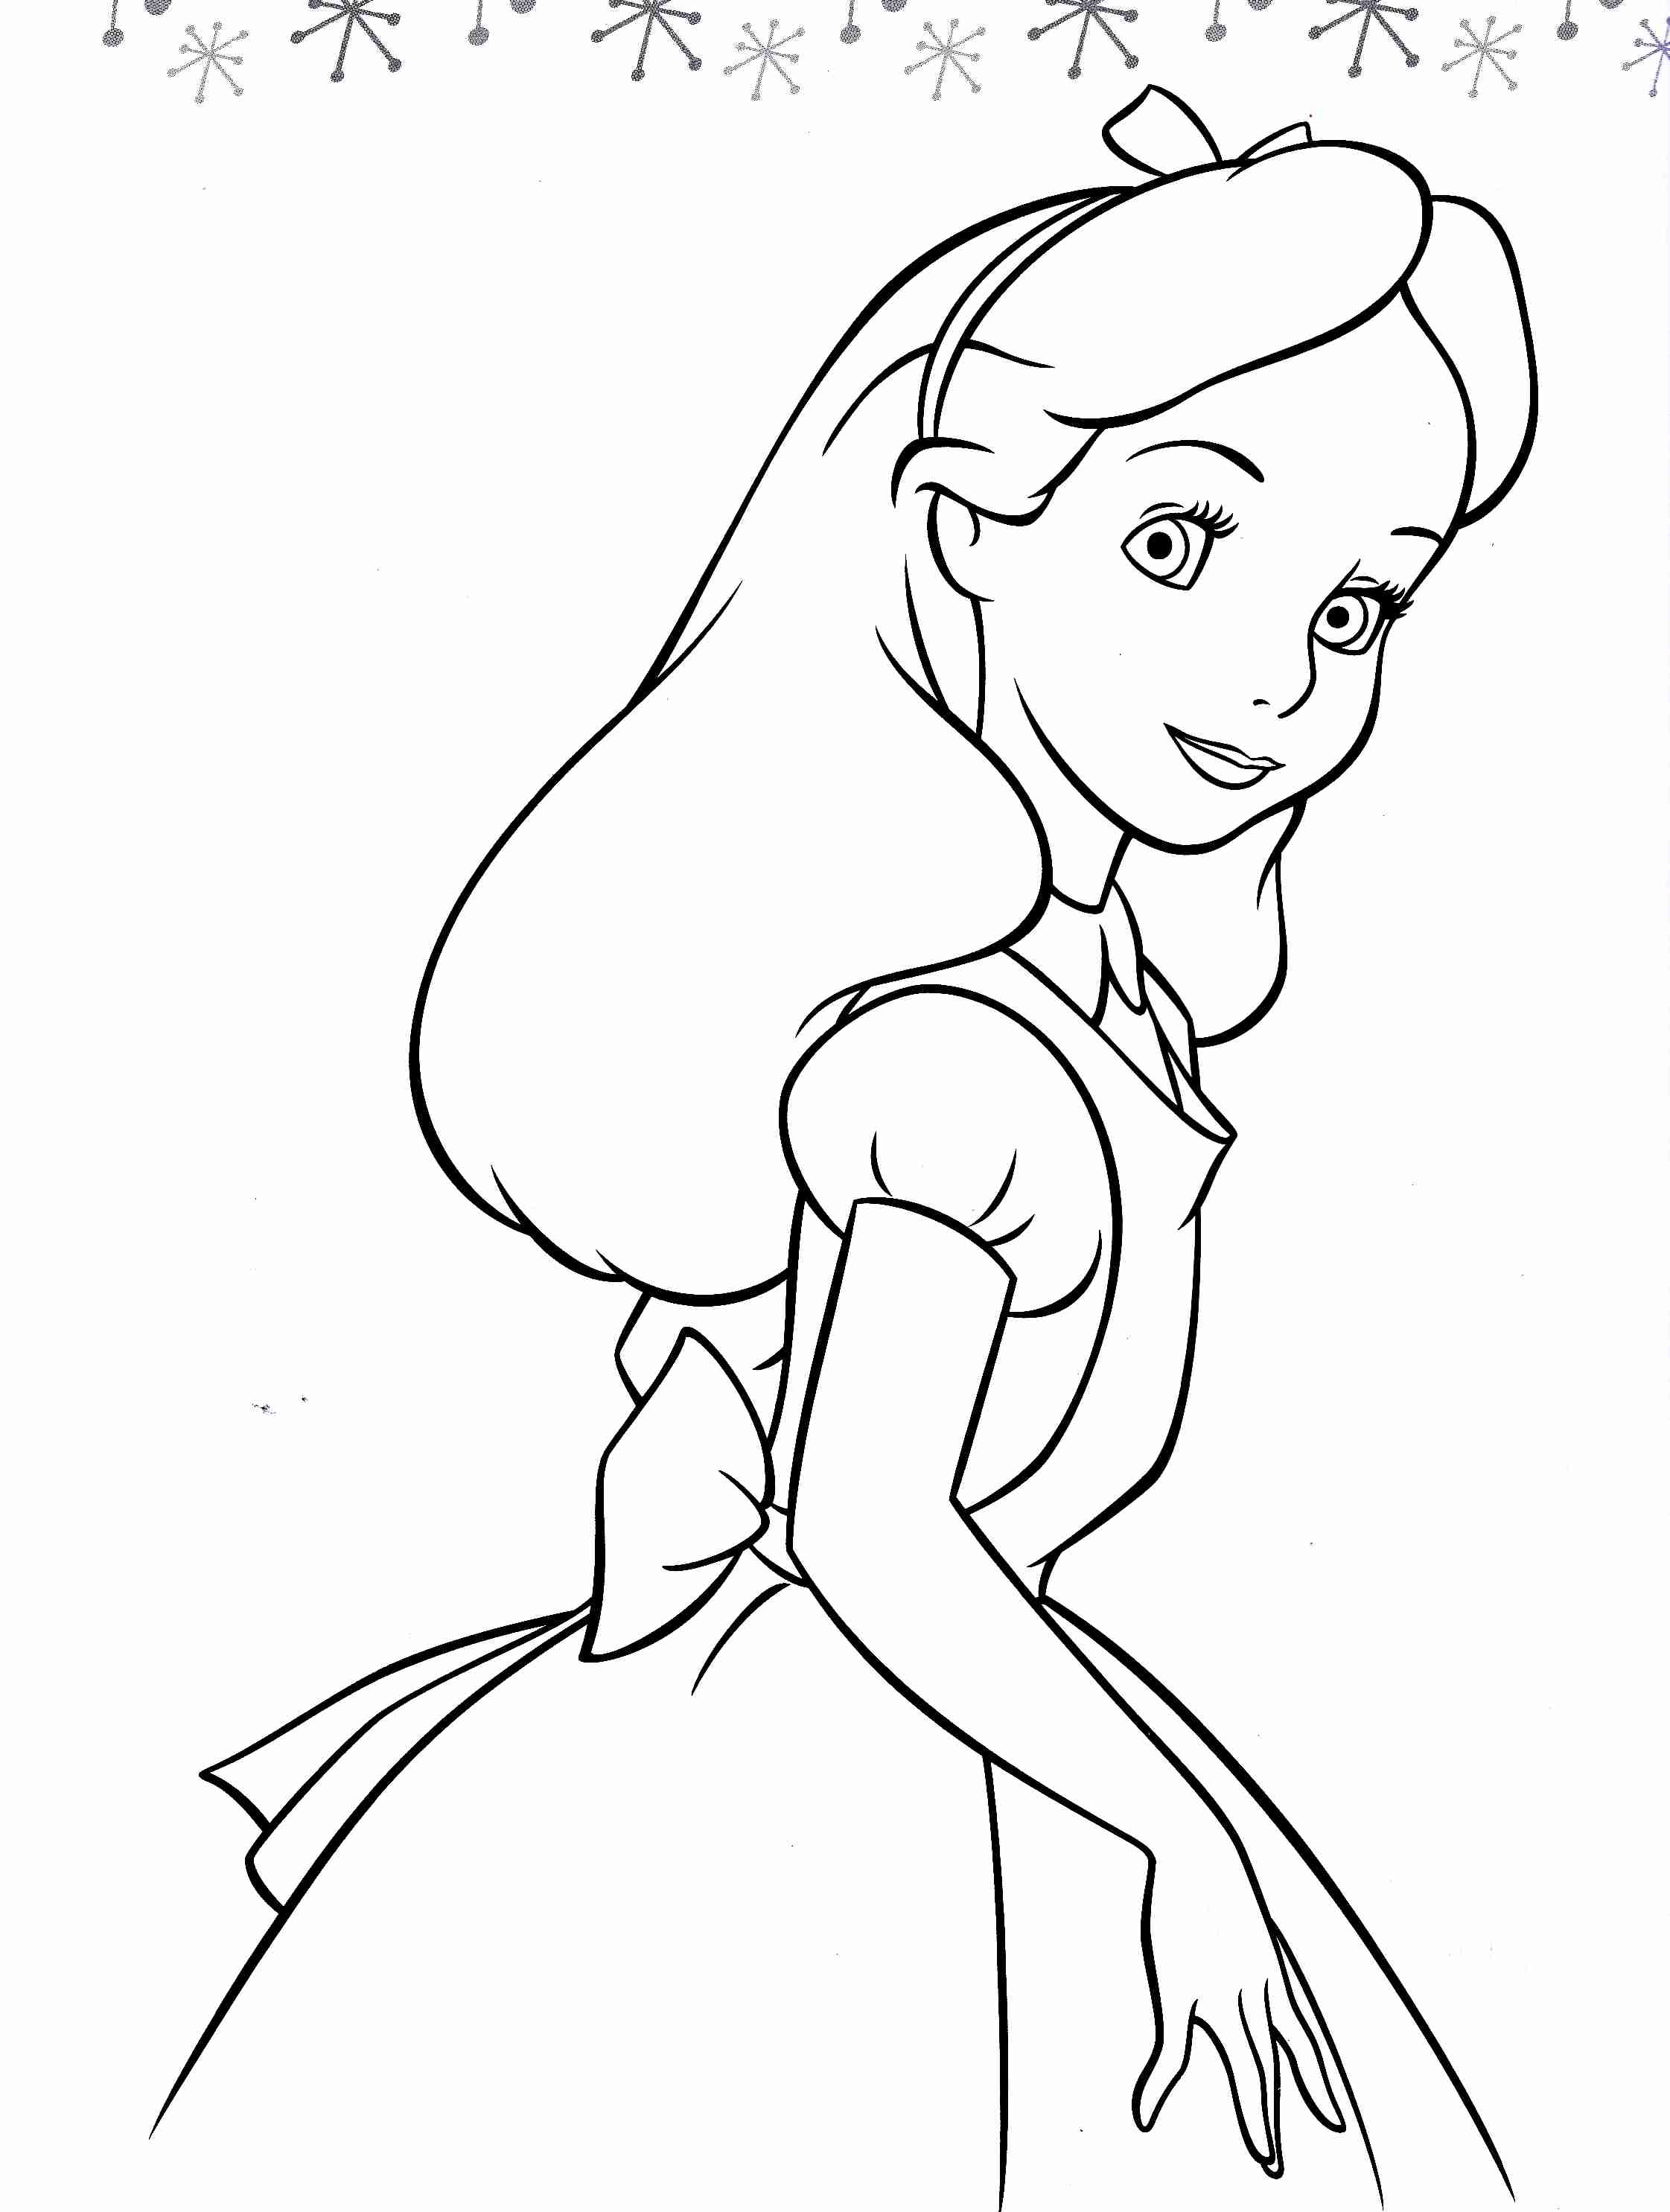 Coloring Pages Of Alice In Wonderland Characters at